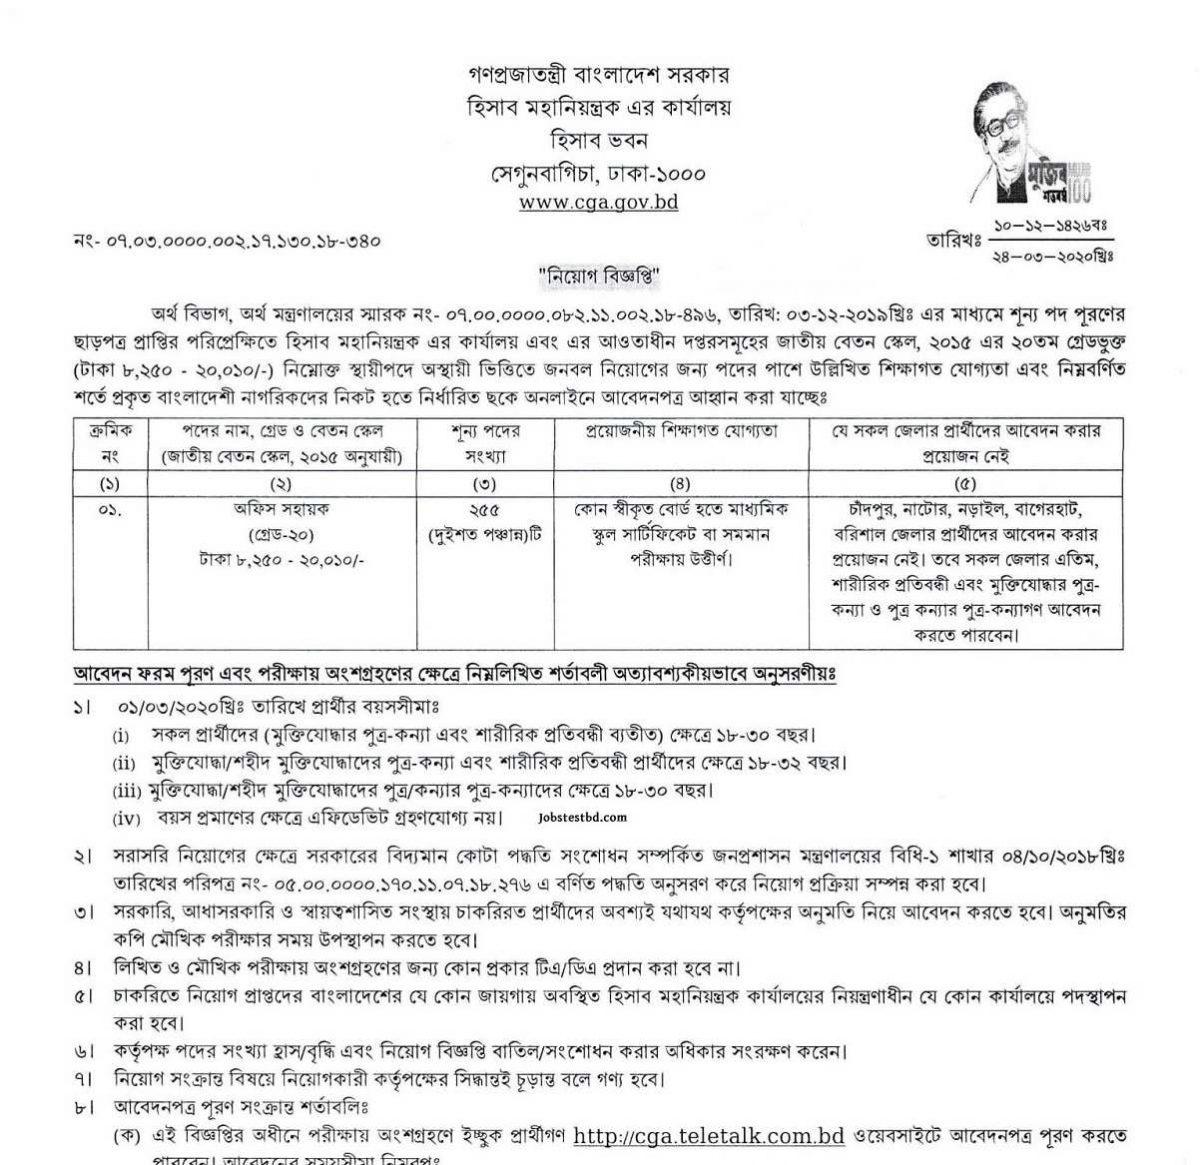 Office of the Controller General of Accounts Job Circular 2020 5